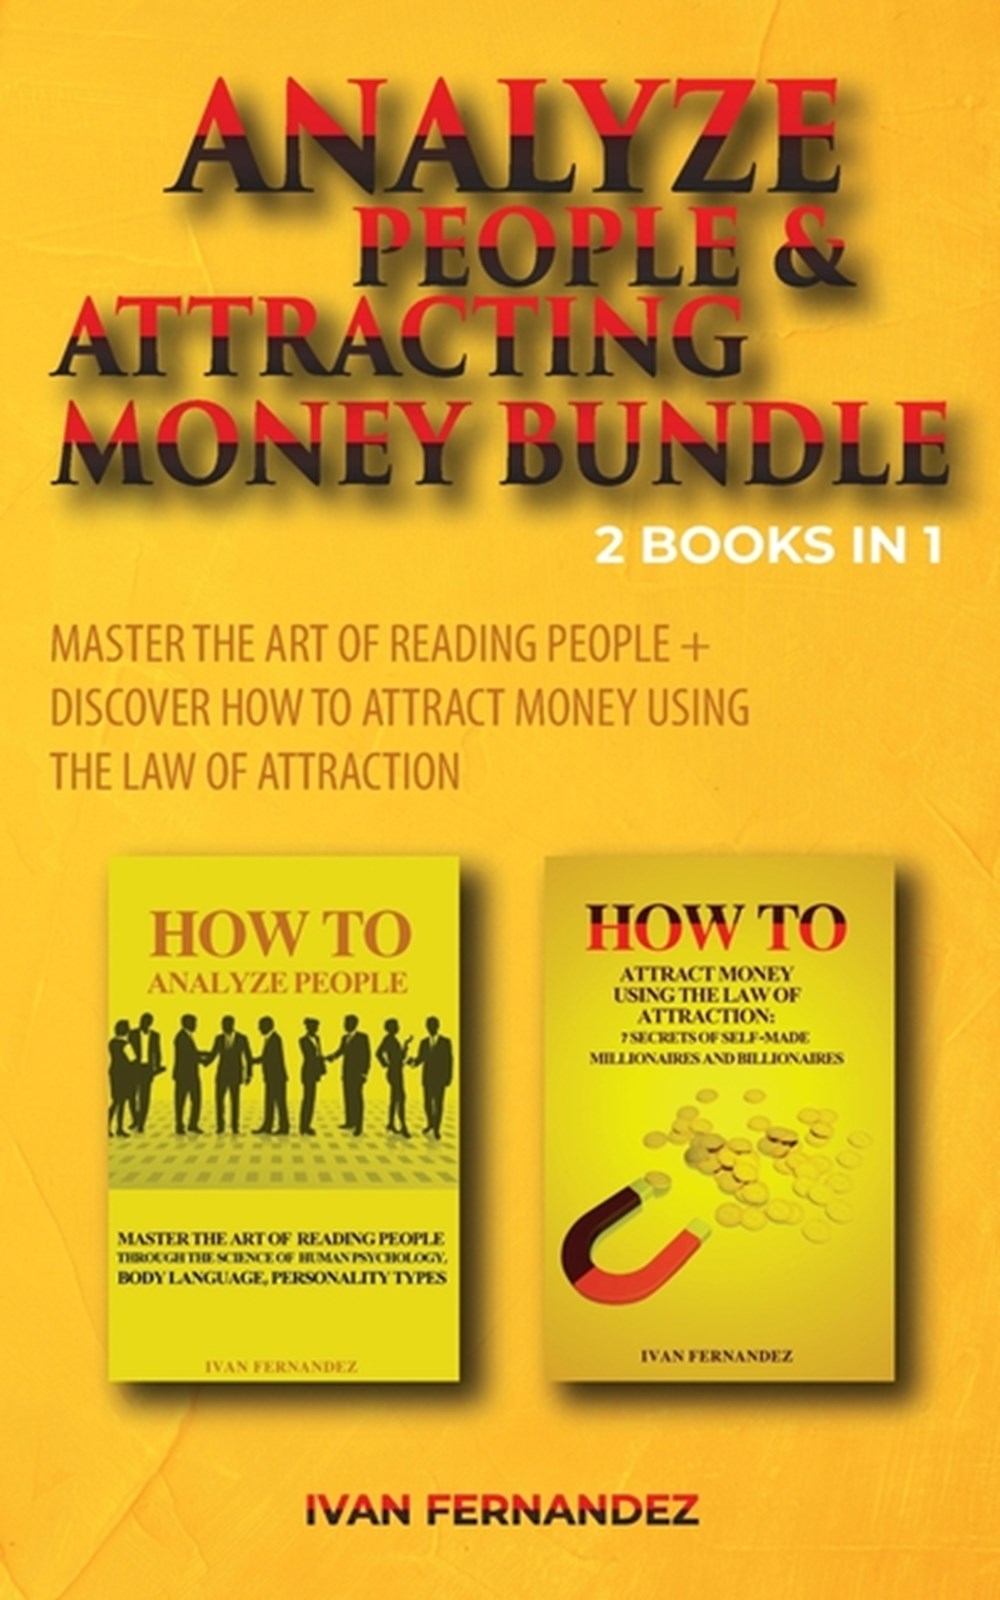 Analyze People & Attracting Money Bundle 2 Books in 1: Master the Art of Reading People + Discover H